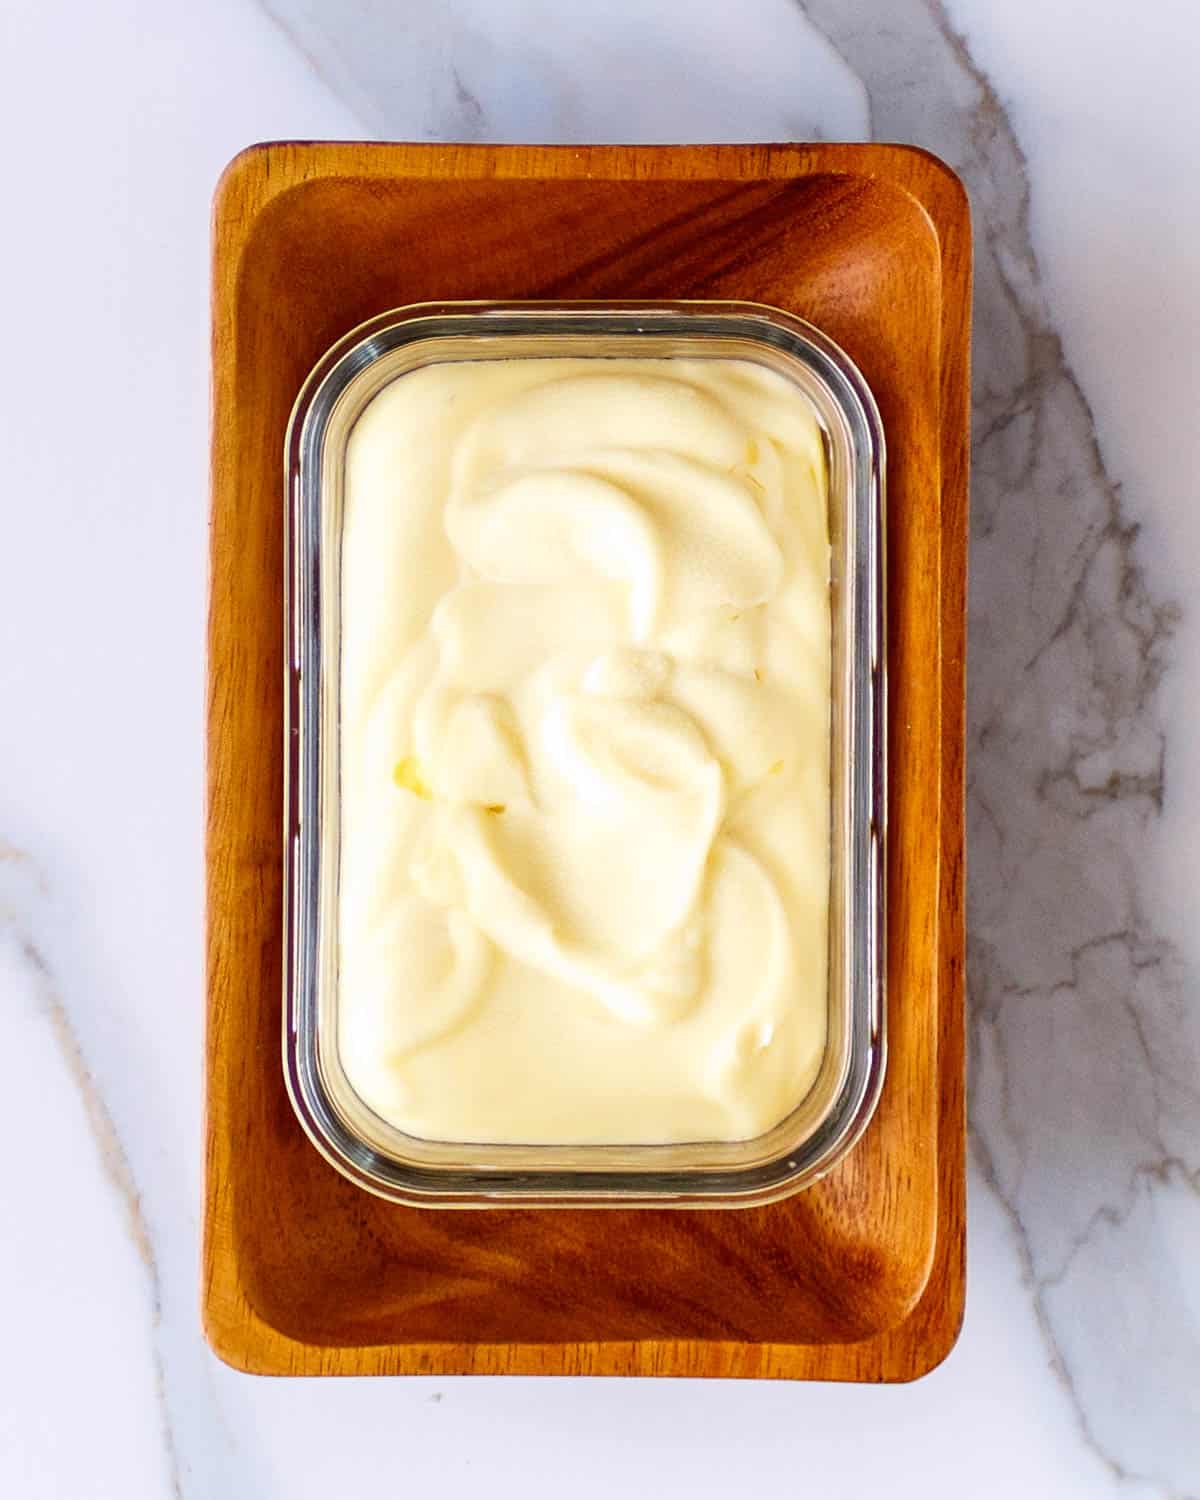 Dish of smooth homemade butter folded into a glass rectangle.